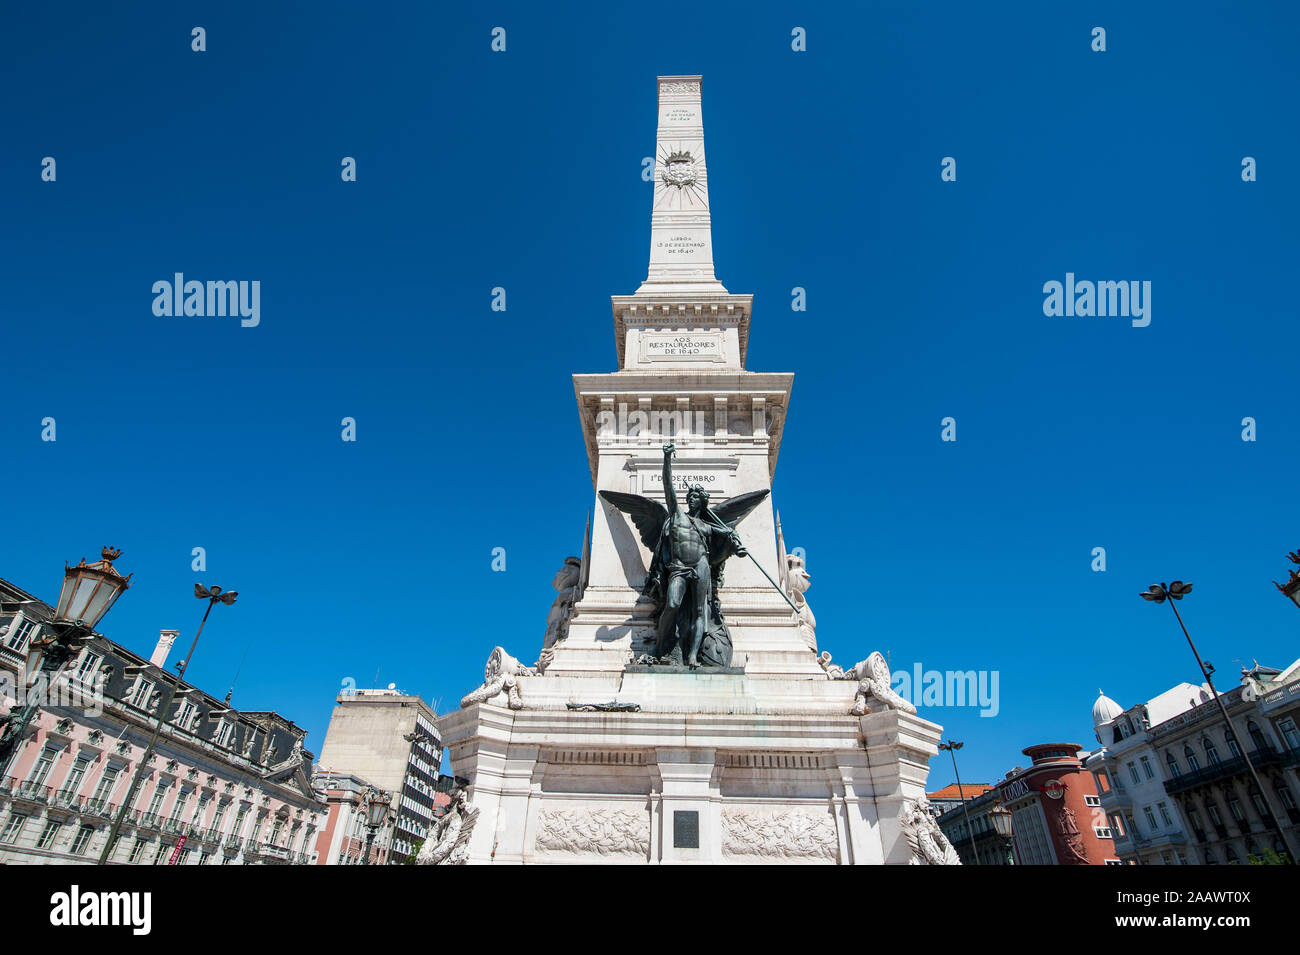 Low angle view of Monument to the Restorers against clear blue sky in Restauradores Square, Lisbon, Portugal Stock Photo